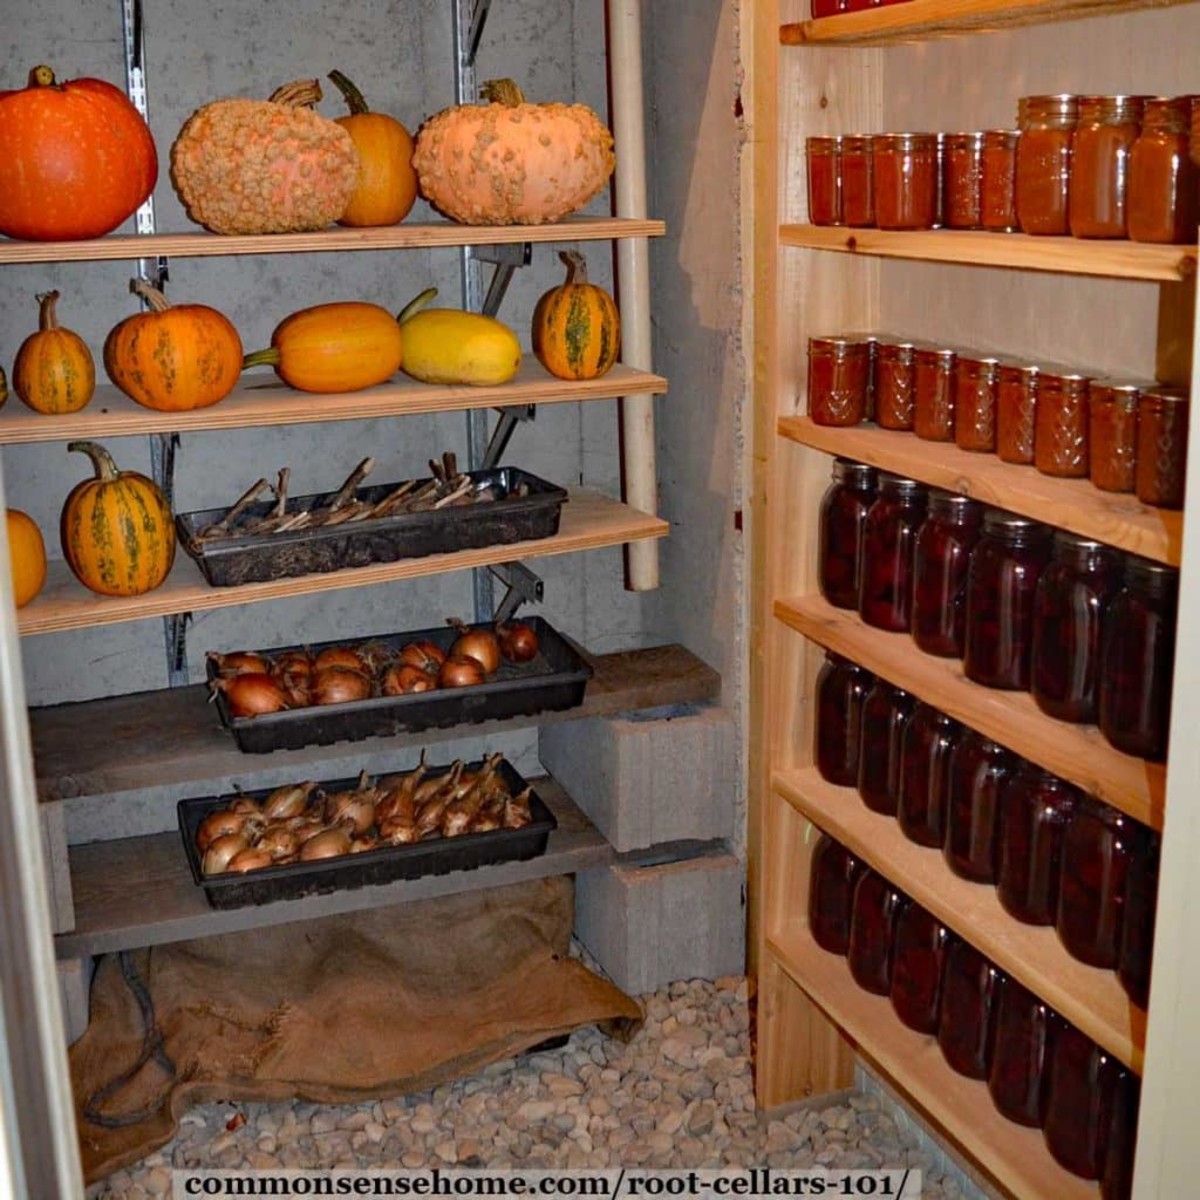 The inside of  a well-organized root cellar.